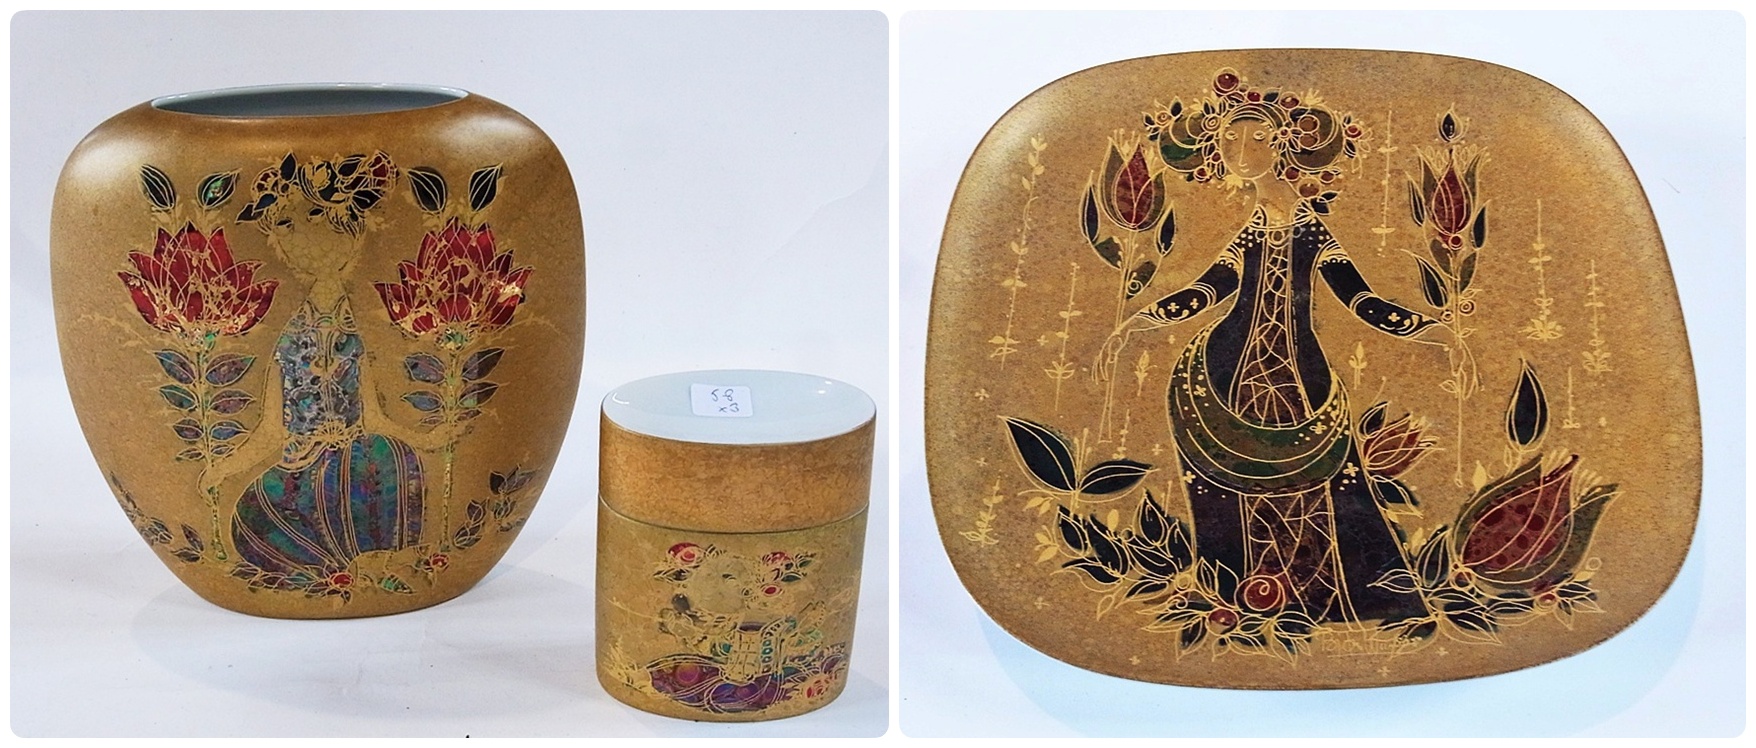 Rosenthal studio Linie gold ground vase, decorated with girls and flowers, inlaid with flash